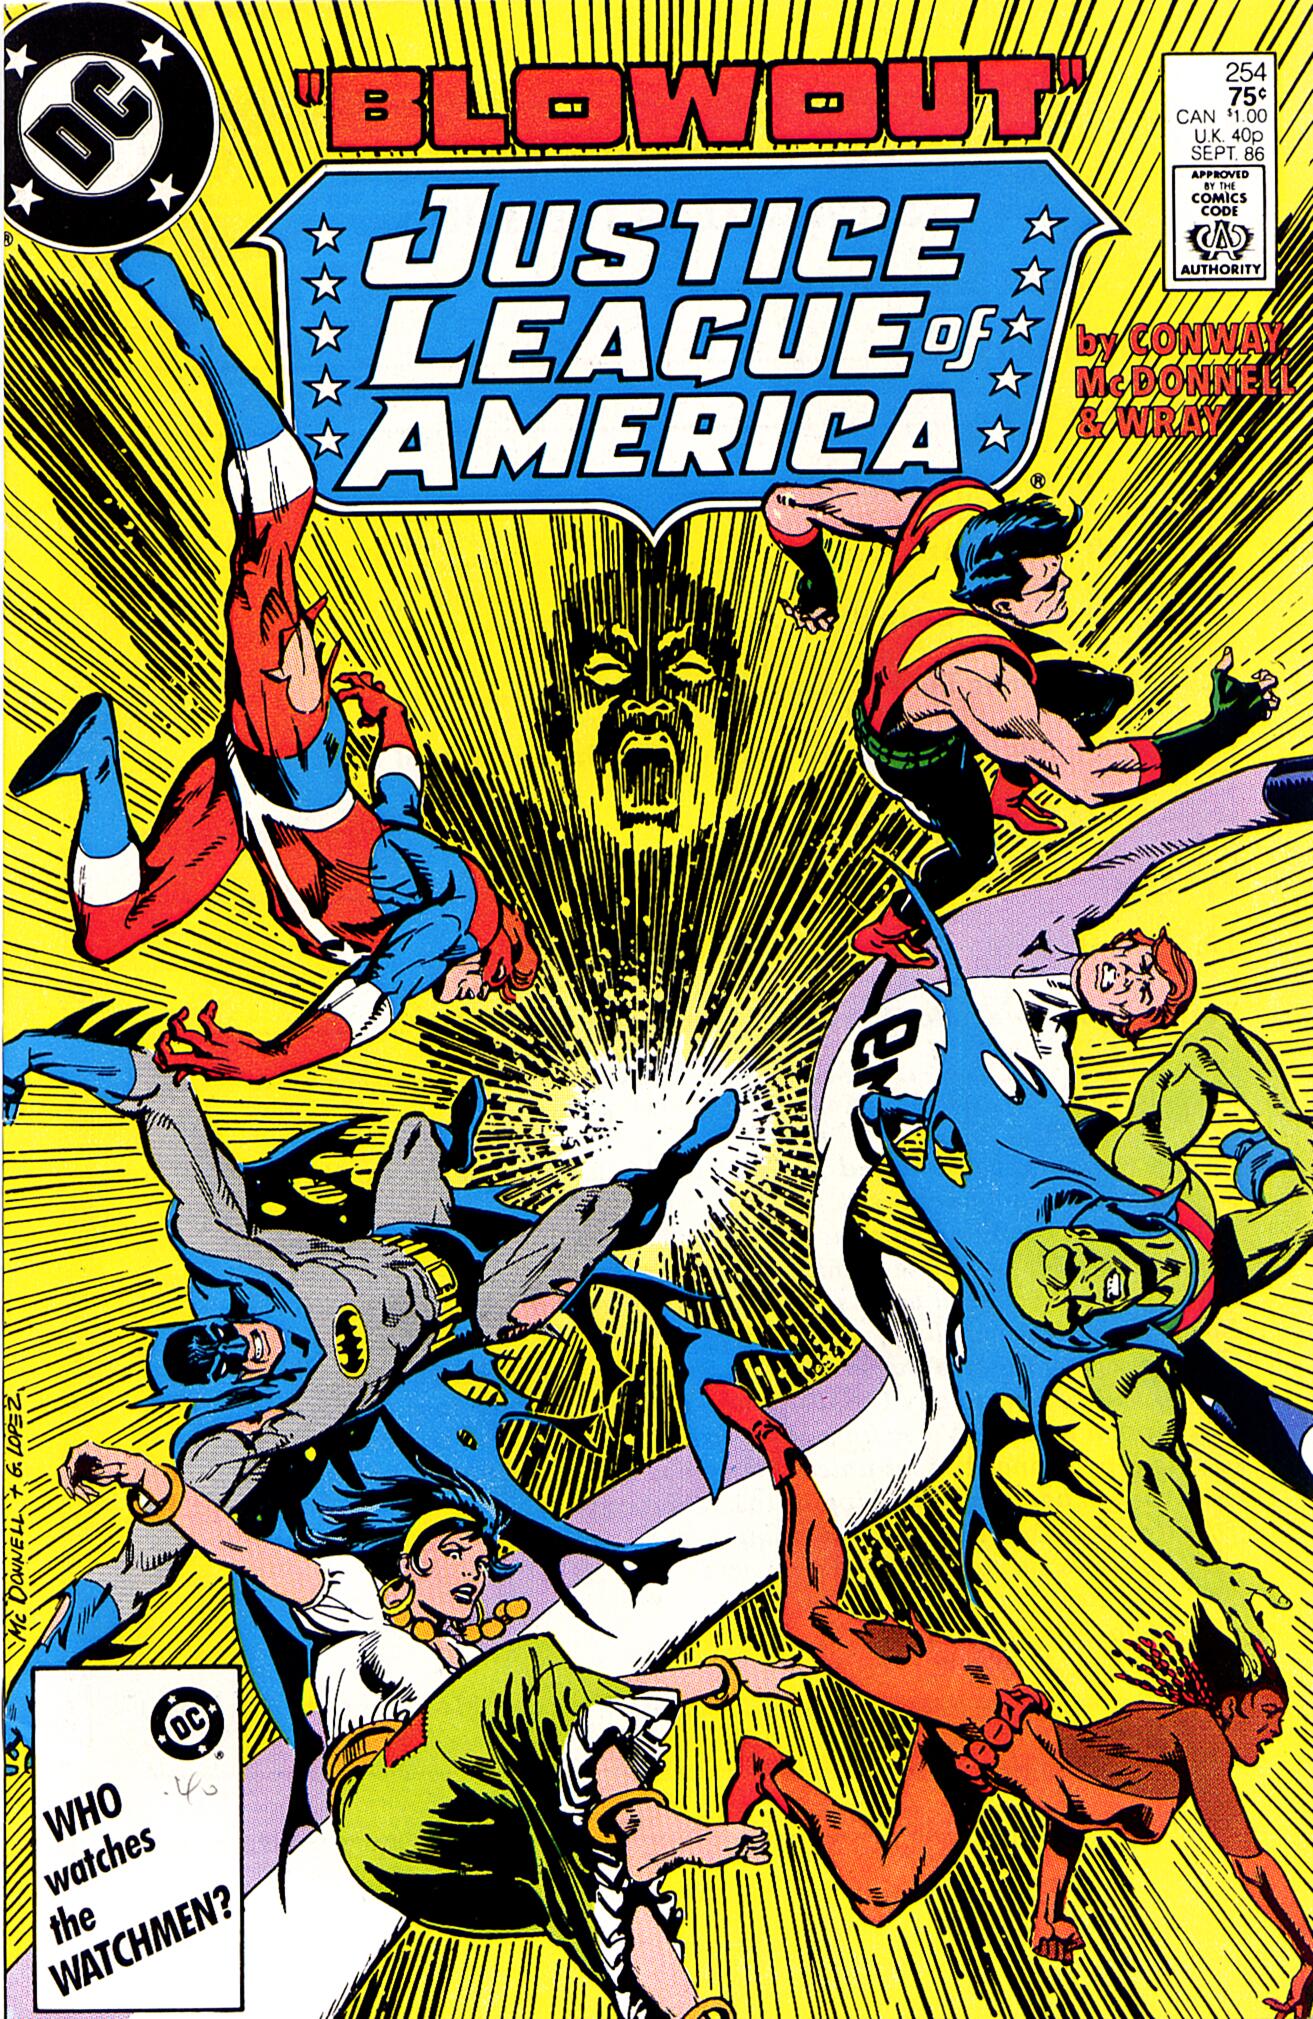 Justice League of America (1960) 254 Page 0